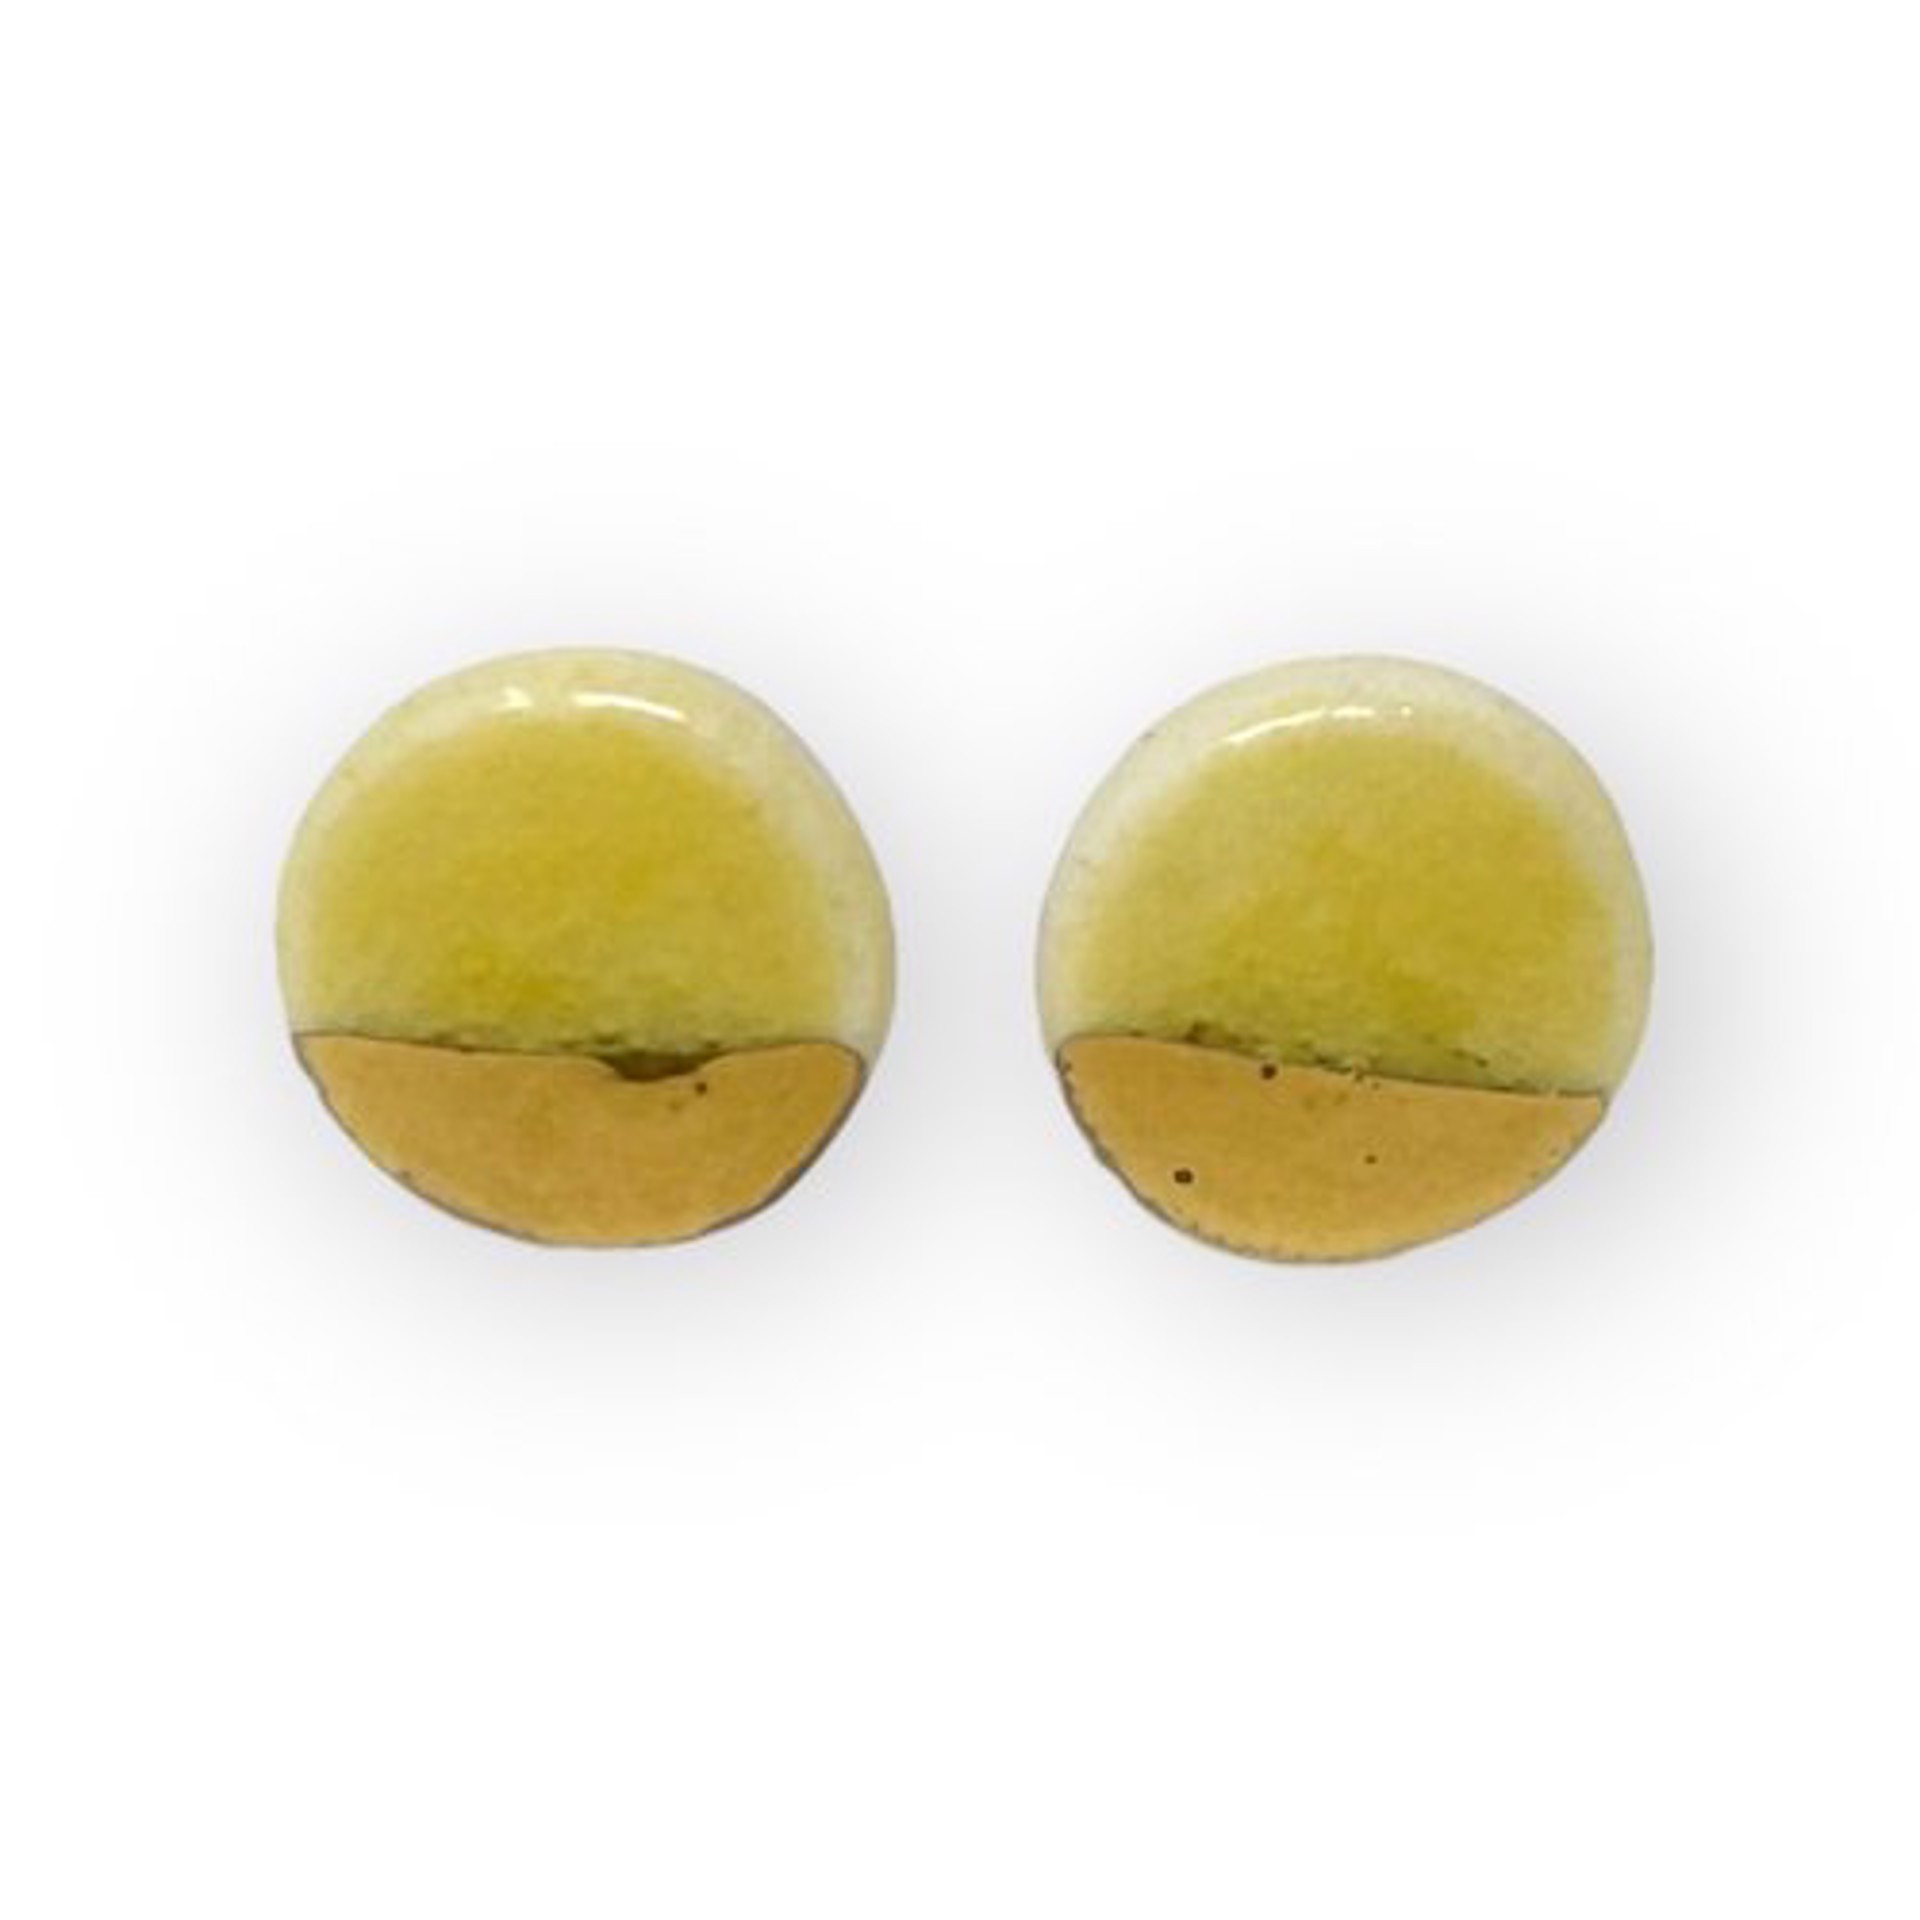 Pebble Studs - White/Gold by Zoe Comings